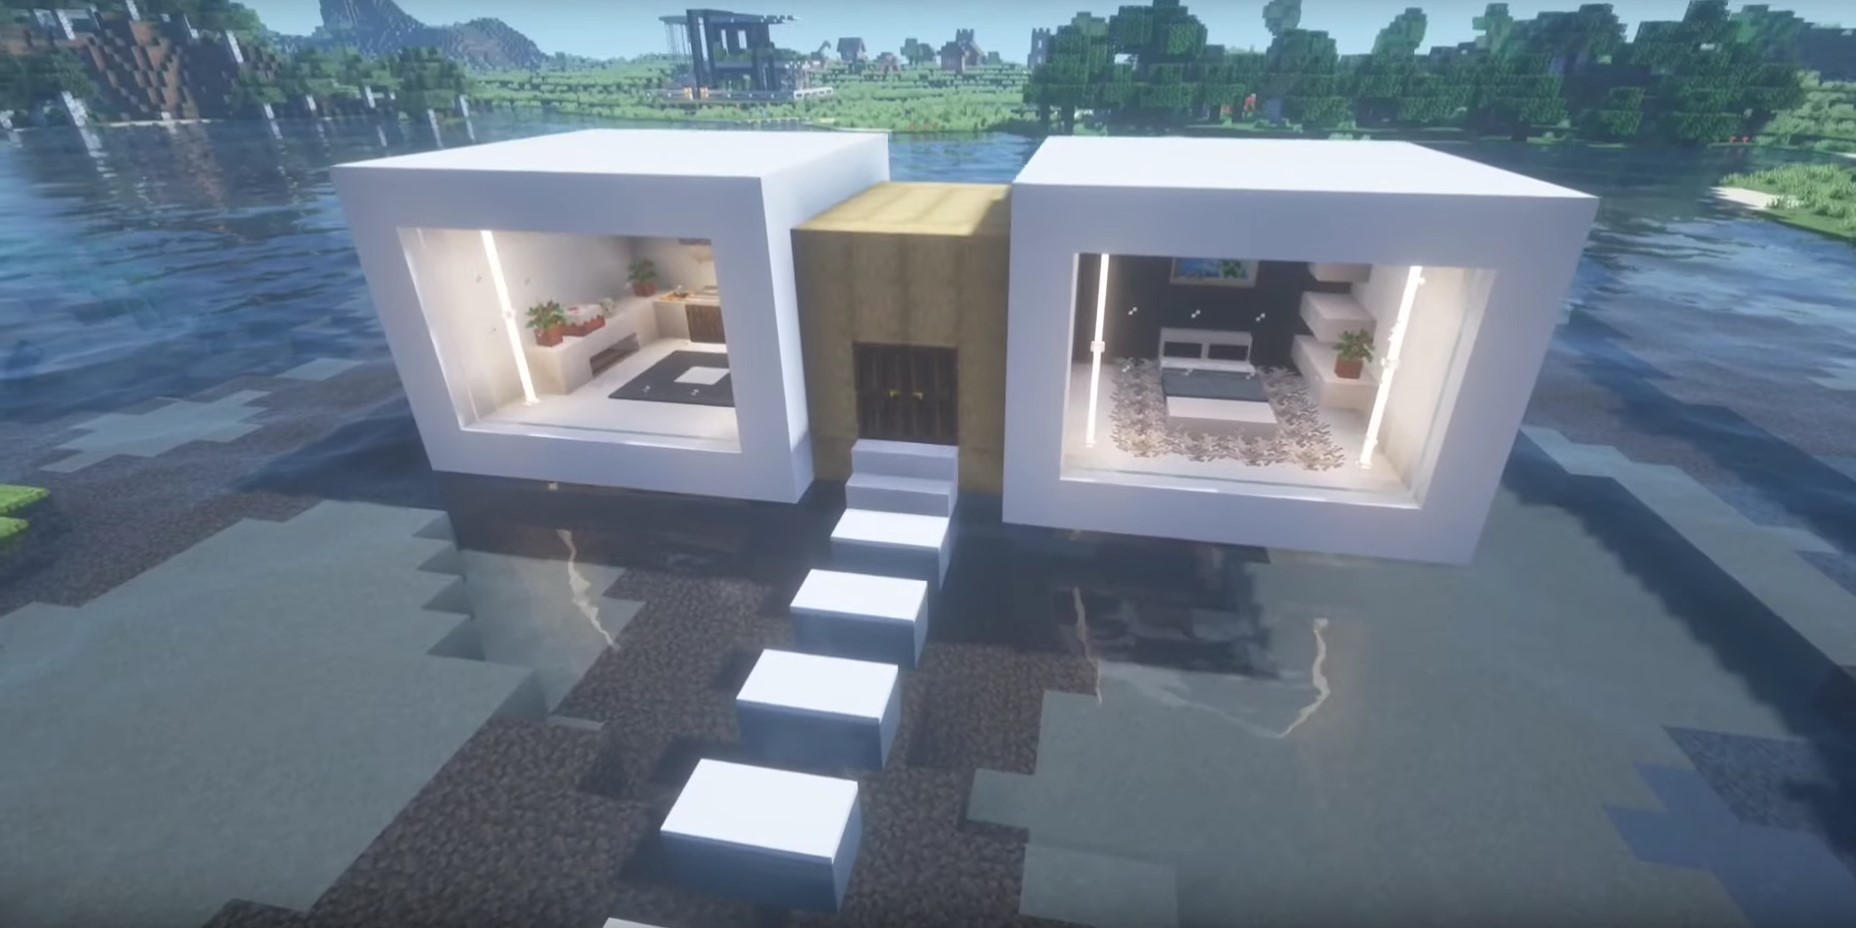 Small modern house on water minecraft building idea